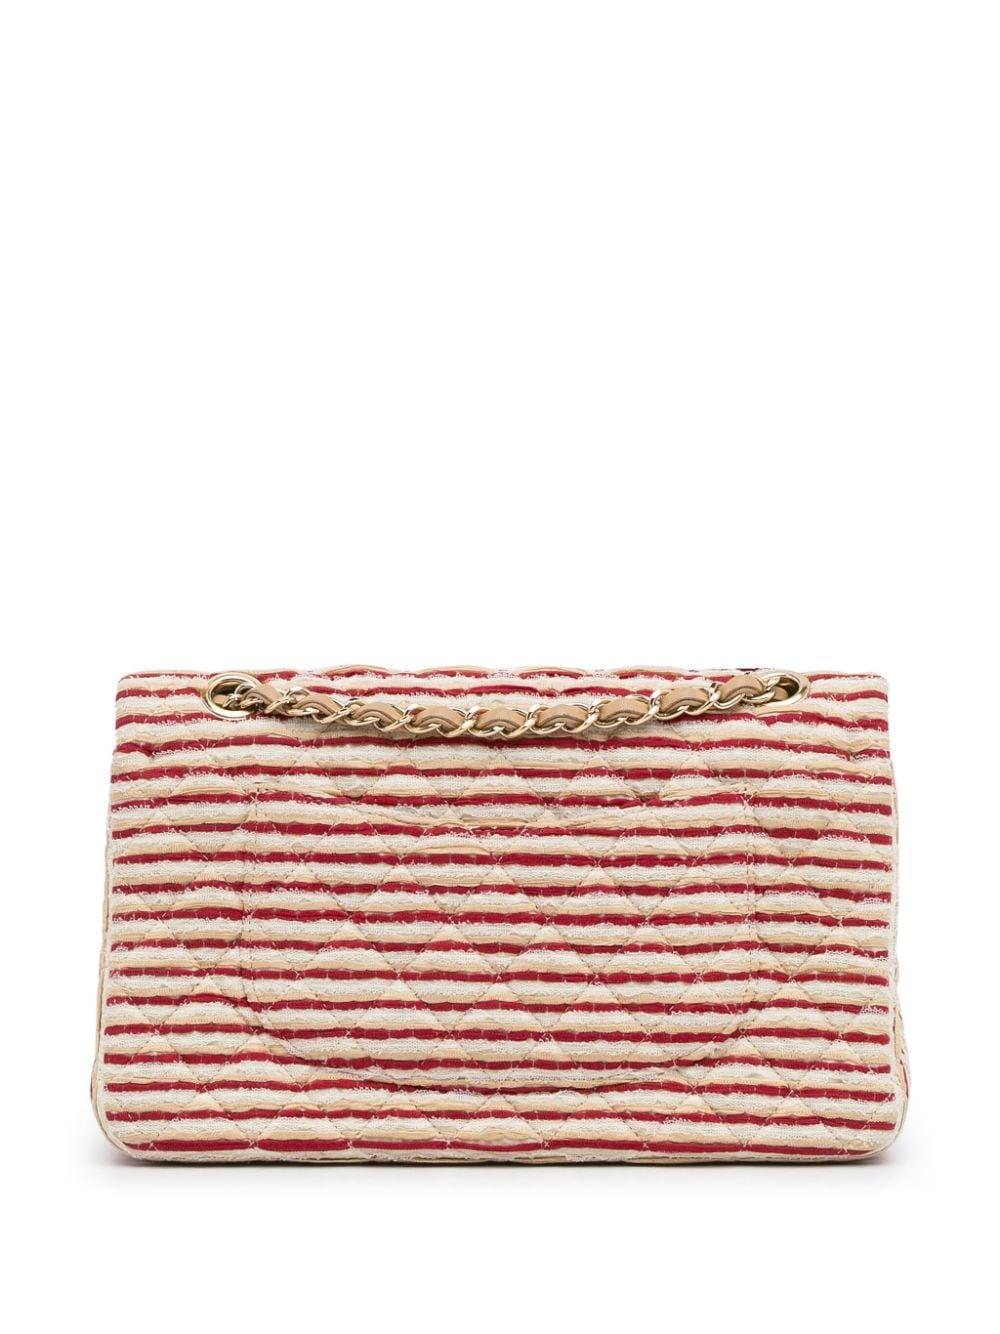 Chanel Medium Classic Vintage Striped Red and Beige Double Flap Bag  1